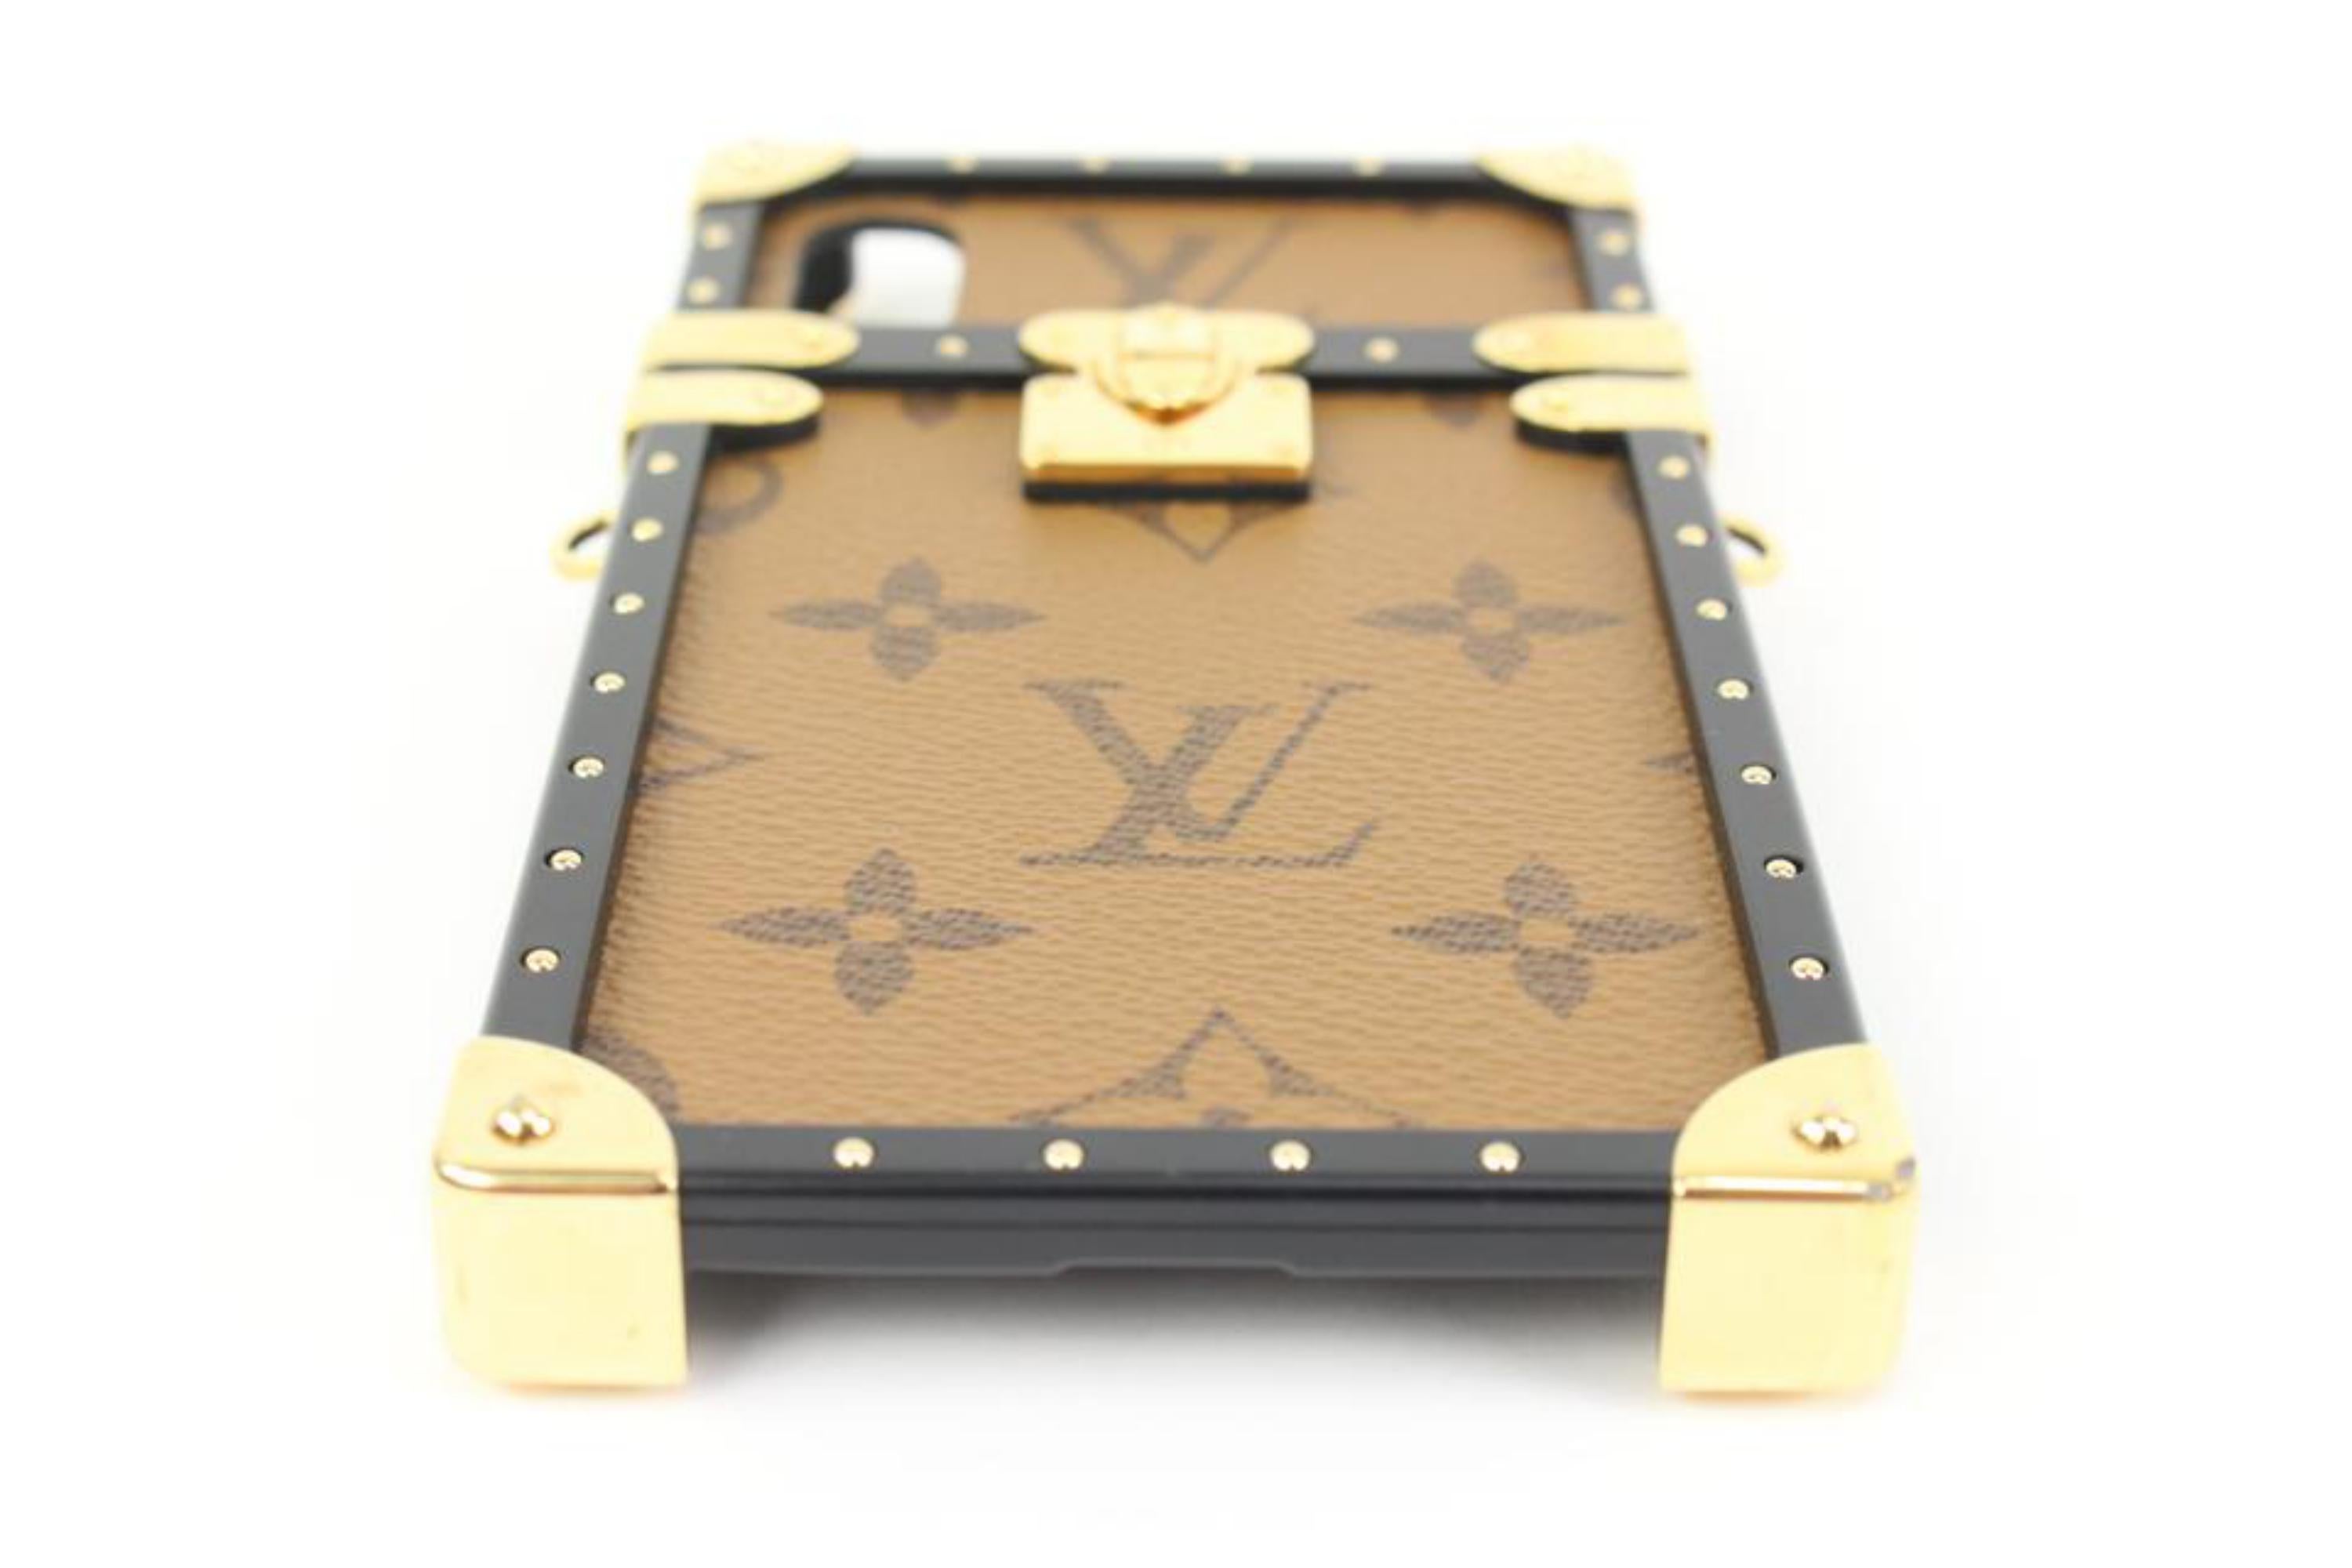 Louis Vuitton Monogram Reverse Eye Trunk iPhone X or XS Phone Case Strap 54lk322 In Good Condition For Sale In Dix hills, NY